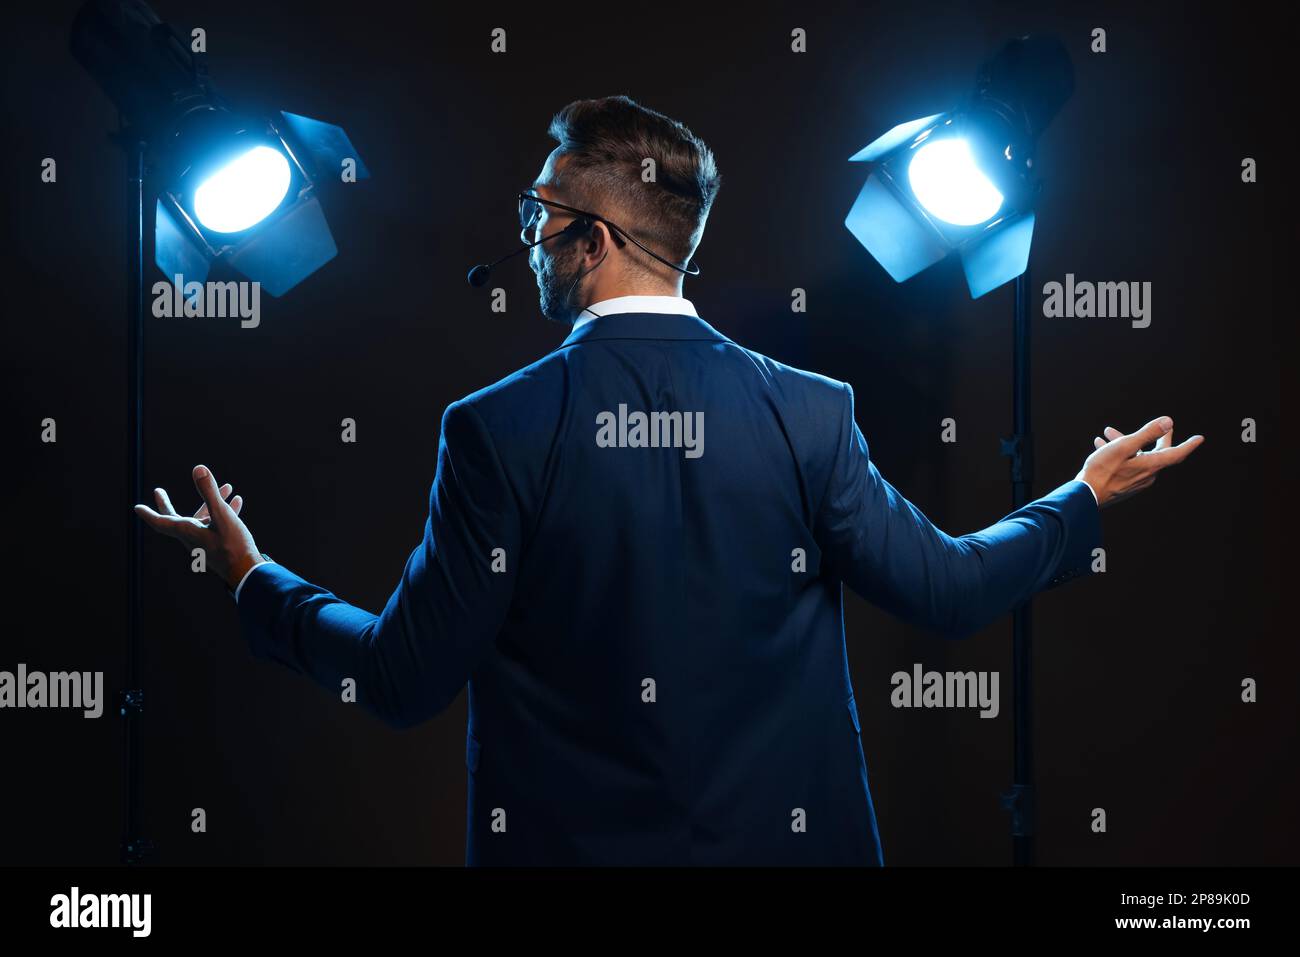 Motivational speaker with headset performing on stage, back view Stock ...